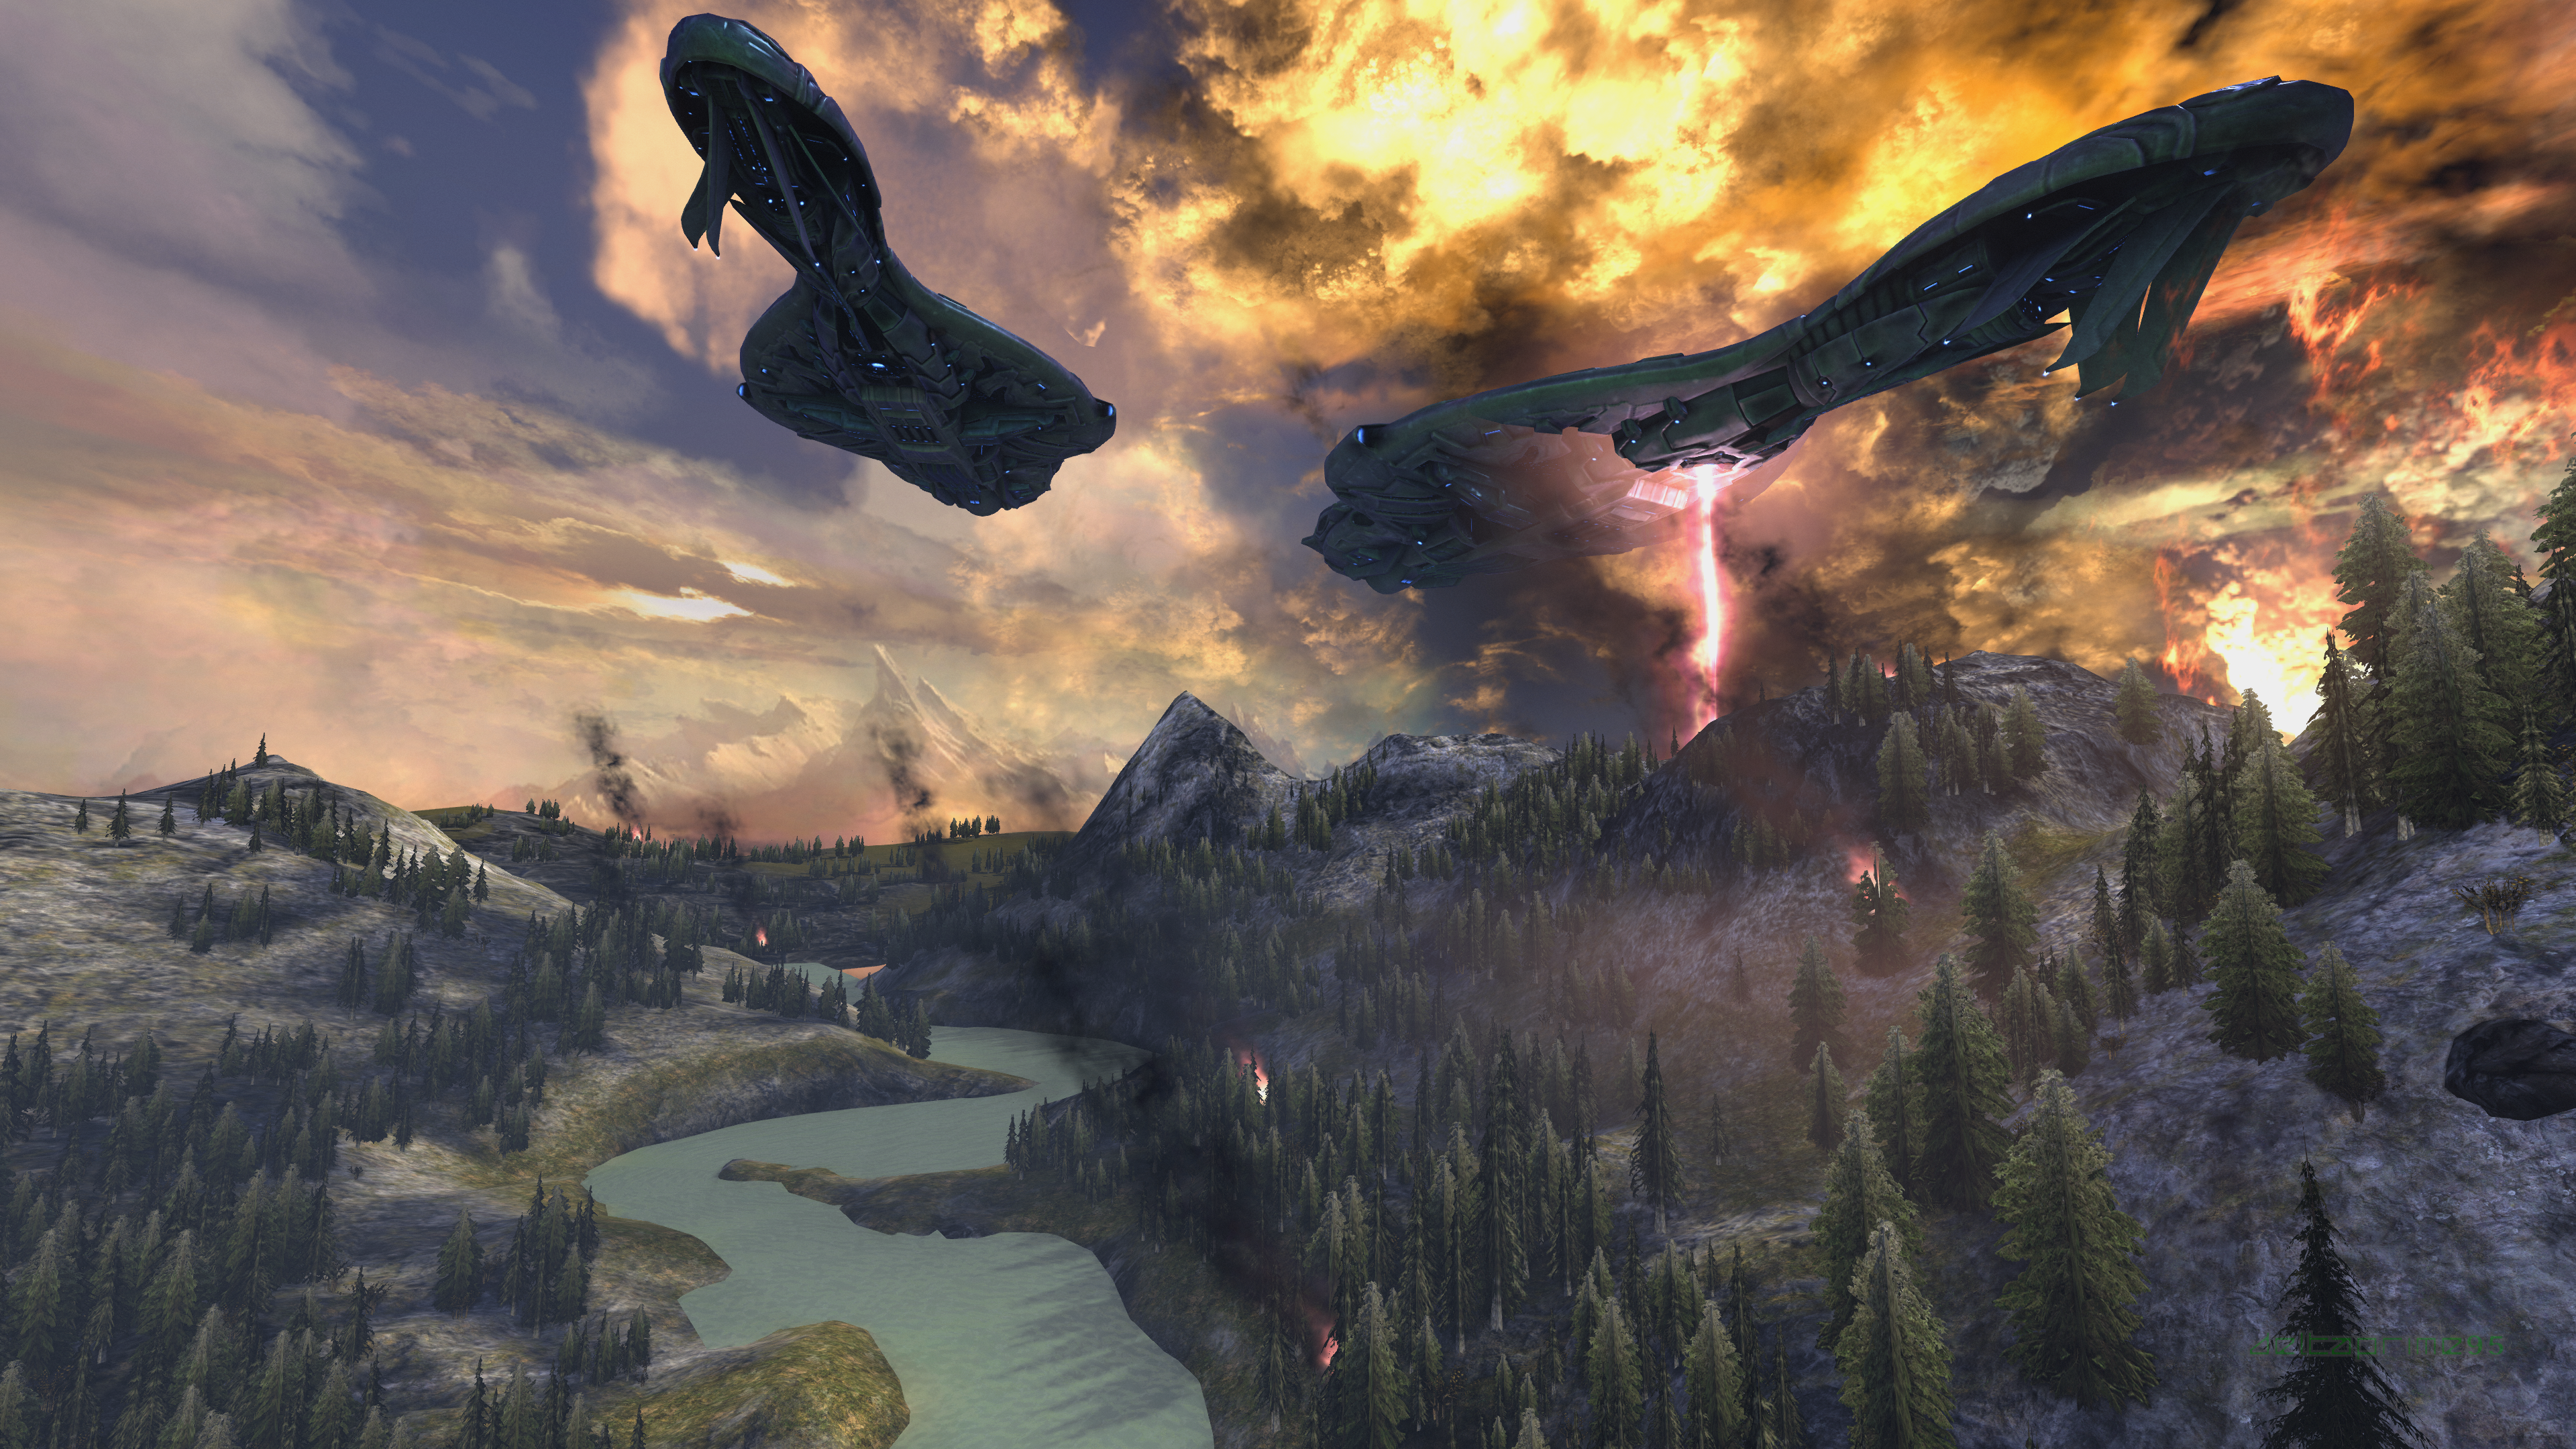 In Game Halo Reach PC Gaming Planet Reach Destruction Fire Covenant Battlecruiser Glassing Highlands 3840x2160